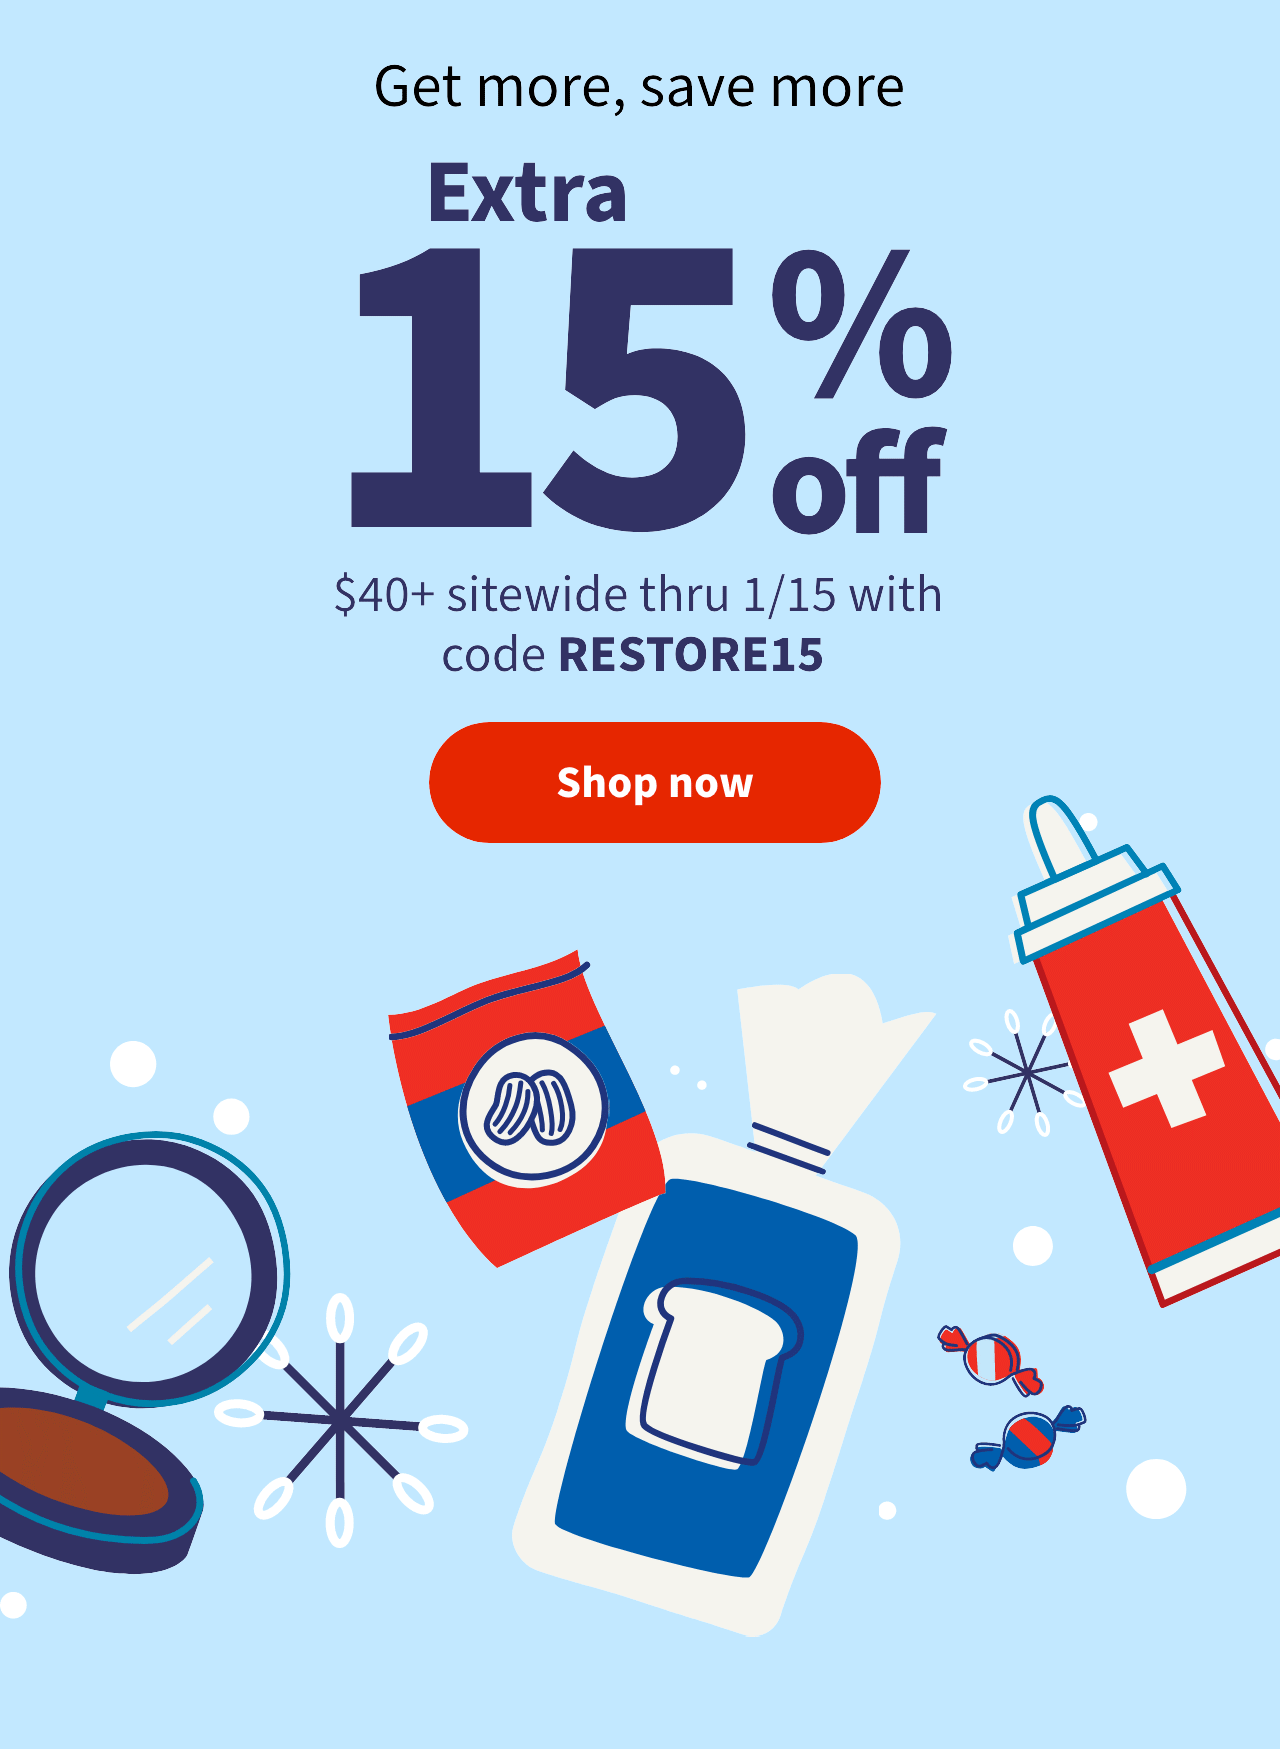 Extra 15% off WYS $40 with code RESTORE15 + Extra 20% off WYS $80 with code RESTORE20